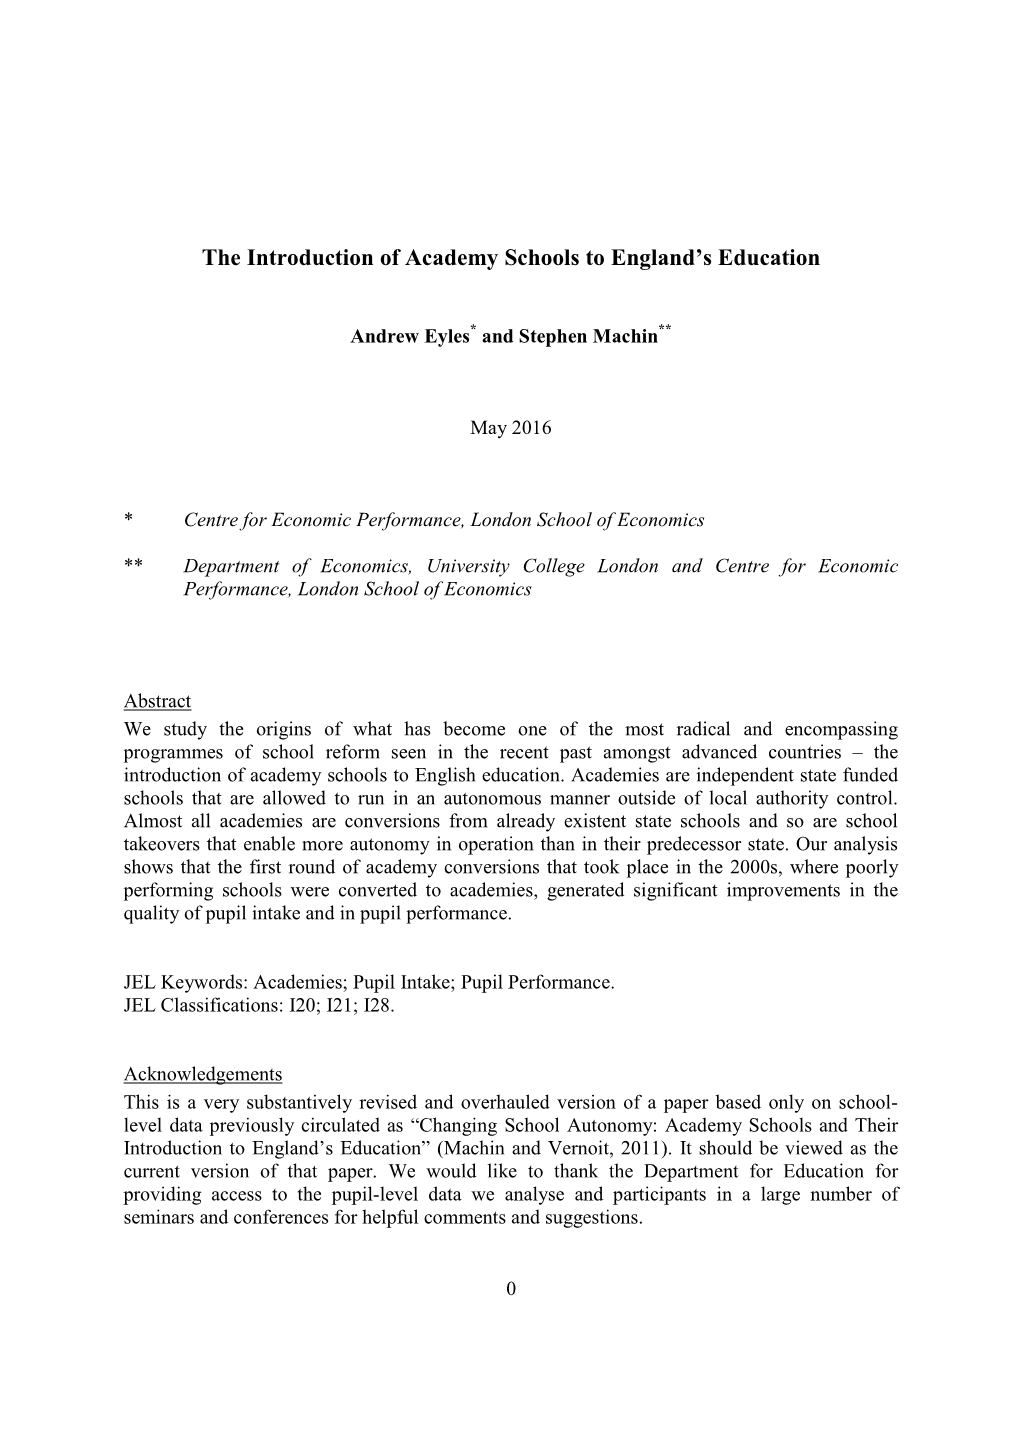 The Introduction of Academy Schools to England's